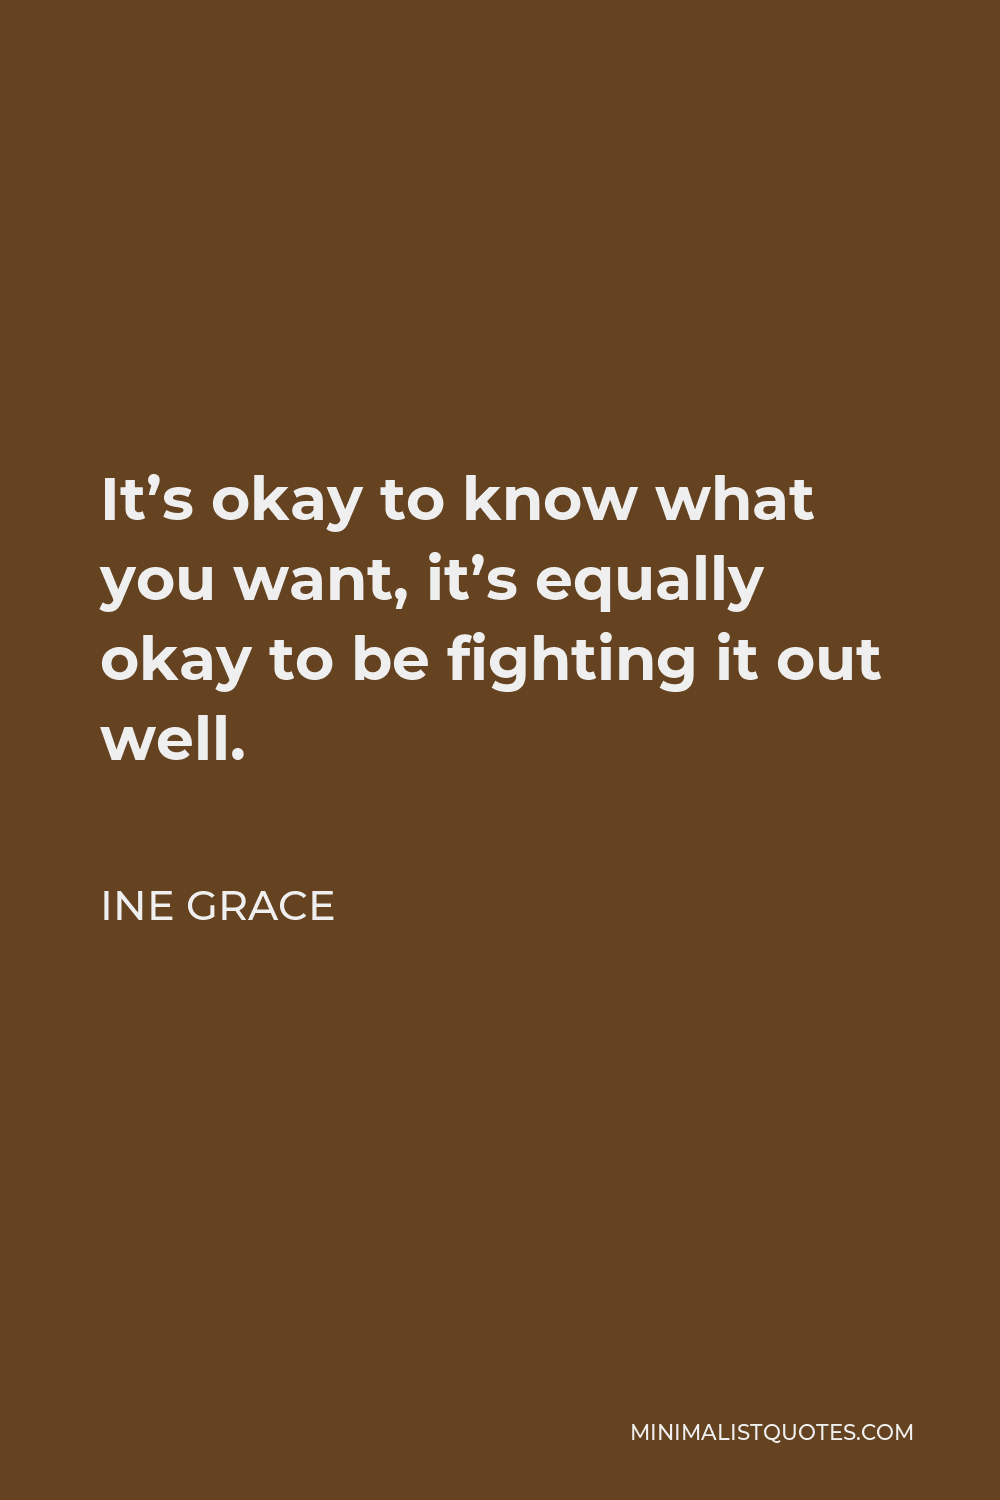 Ine Grace Quote - It’s okay to know what you want, it’s equally okay to be fighting it out well.